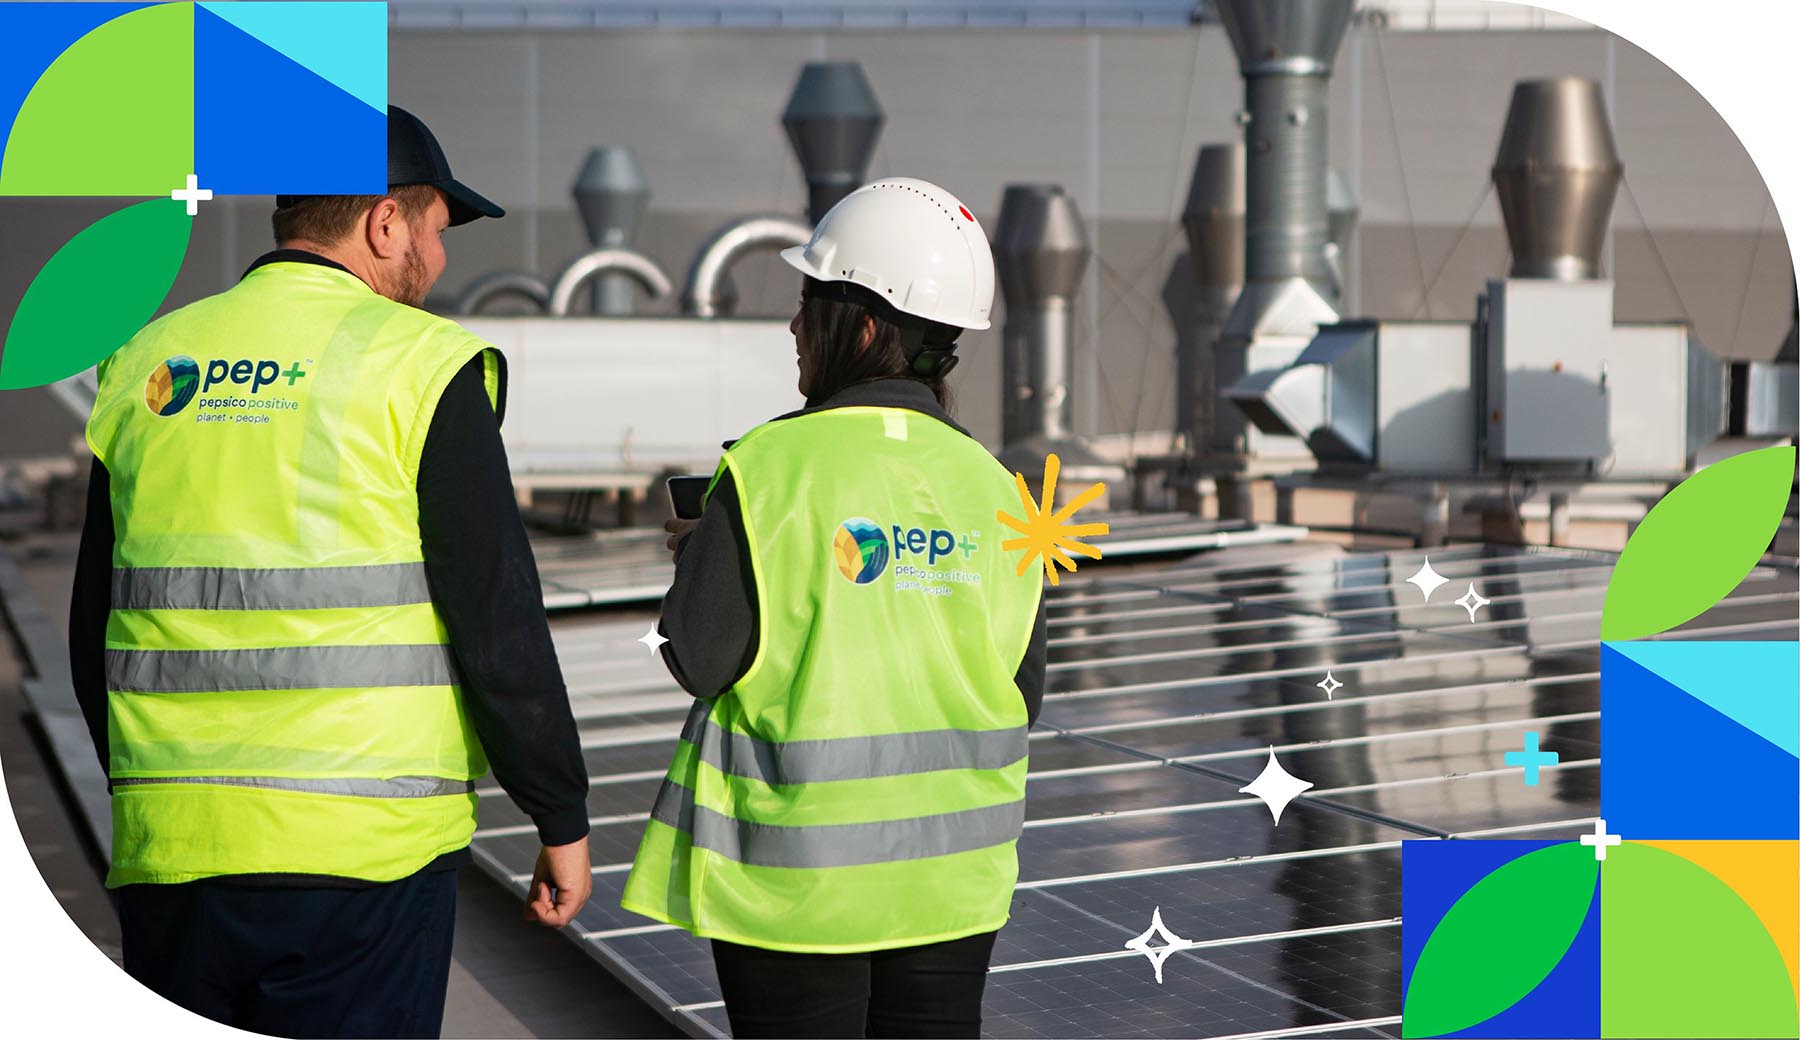 Two workers in PepsiCo Positive safety vests in front of solar panels